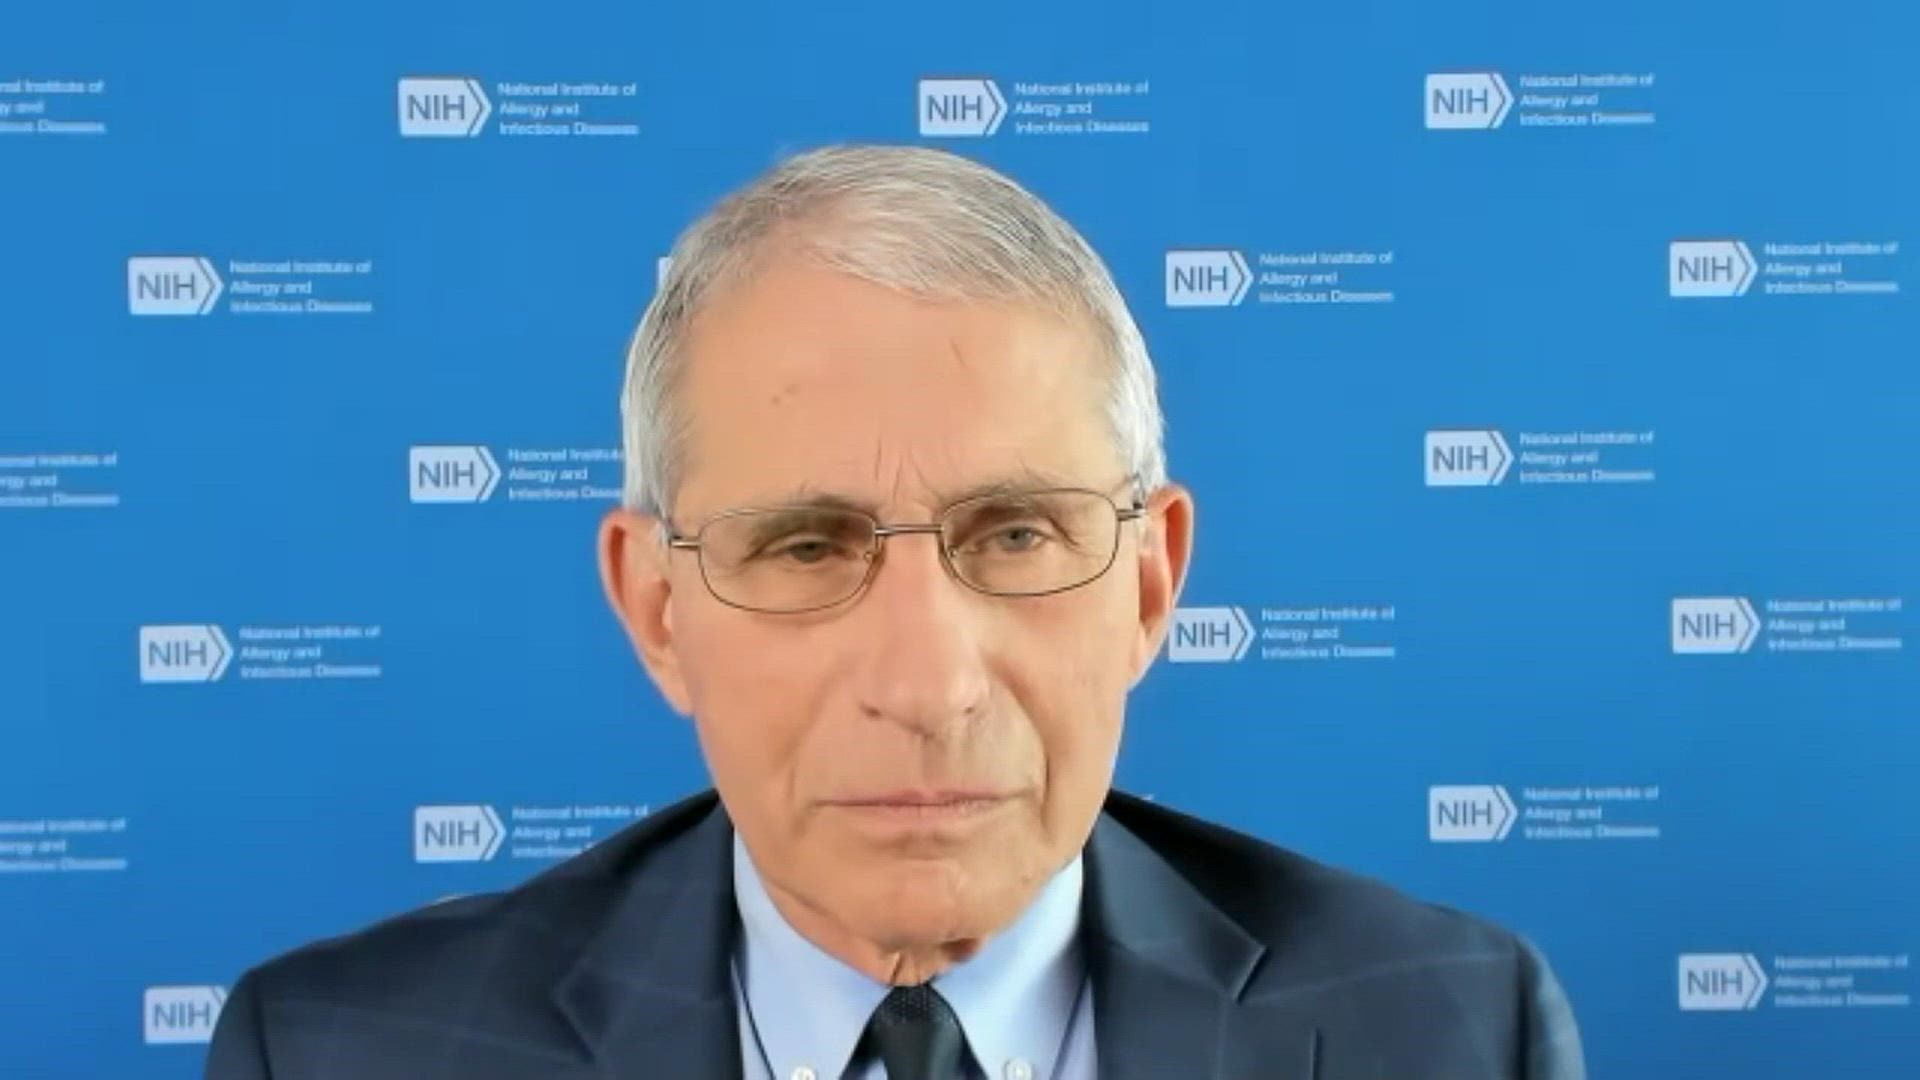 Dr. Anthony Fauci, the head of the National Institute of Allergy and Infectious Diseases, said he remains  "concerned" that Americans might not get vaccinated.